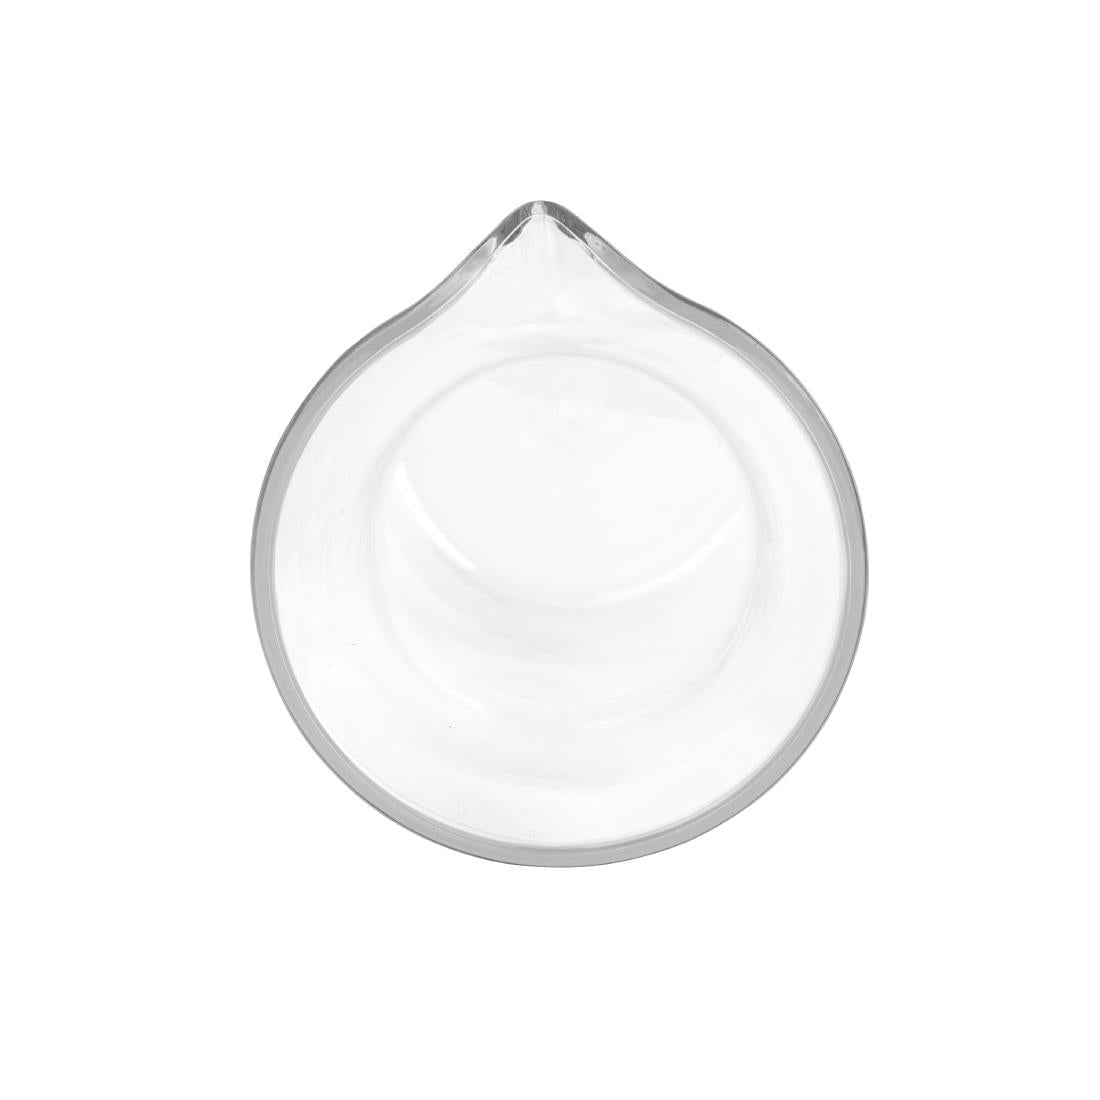 DS146 Kristallon Polycarbonate Carafes 1Ltr (Pack of 6) JD Catering Equipment Solutions Ltd